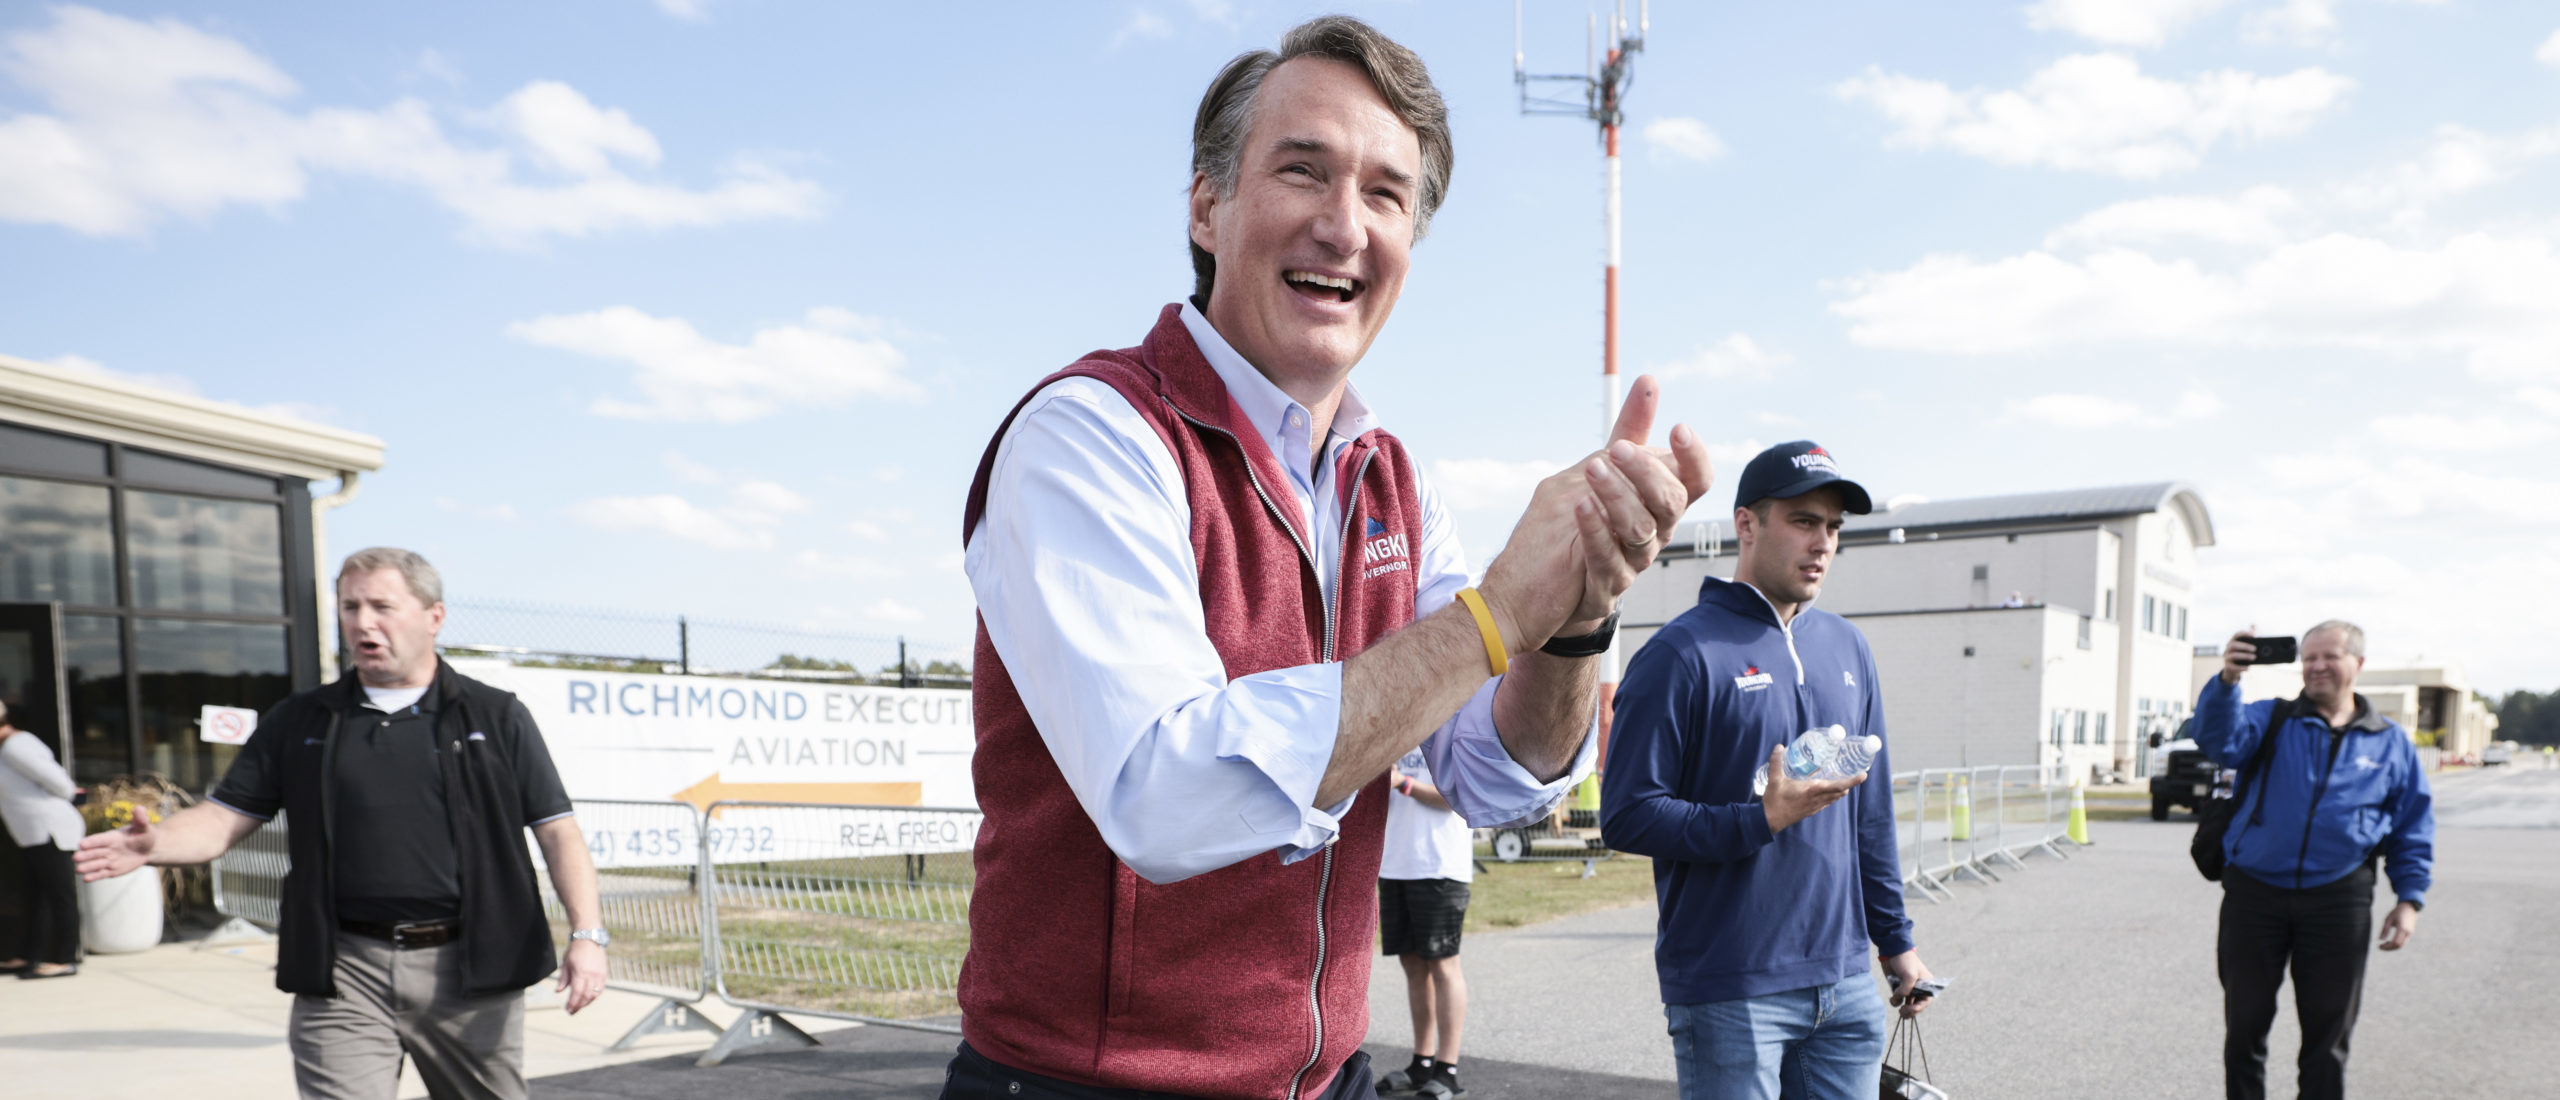 RICHMOND, VIRGINIA - NOVEMBER 01: Virginia Republican gubernatorial candidate Glenn Youngkin holds walks out of the Chesterfield County Airport after a campaign rally on November 01, 2021 in Richmond, Virginia. (Photo by Anna Moneymaker/Getty Images)